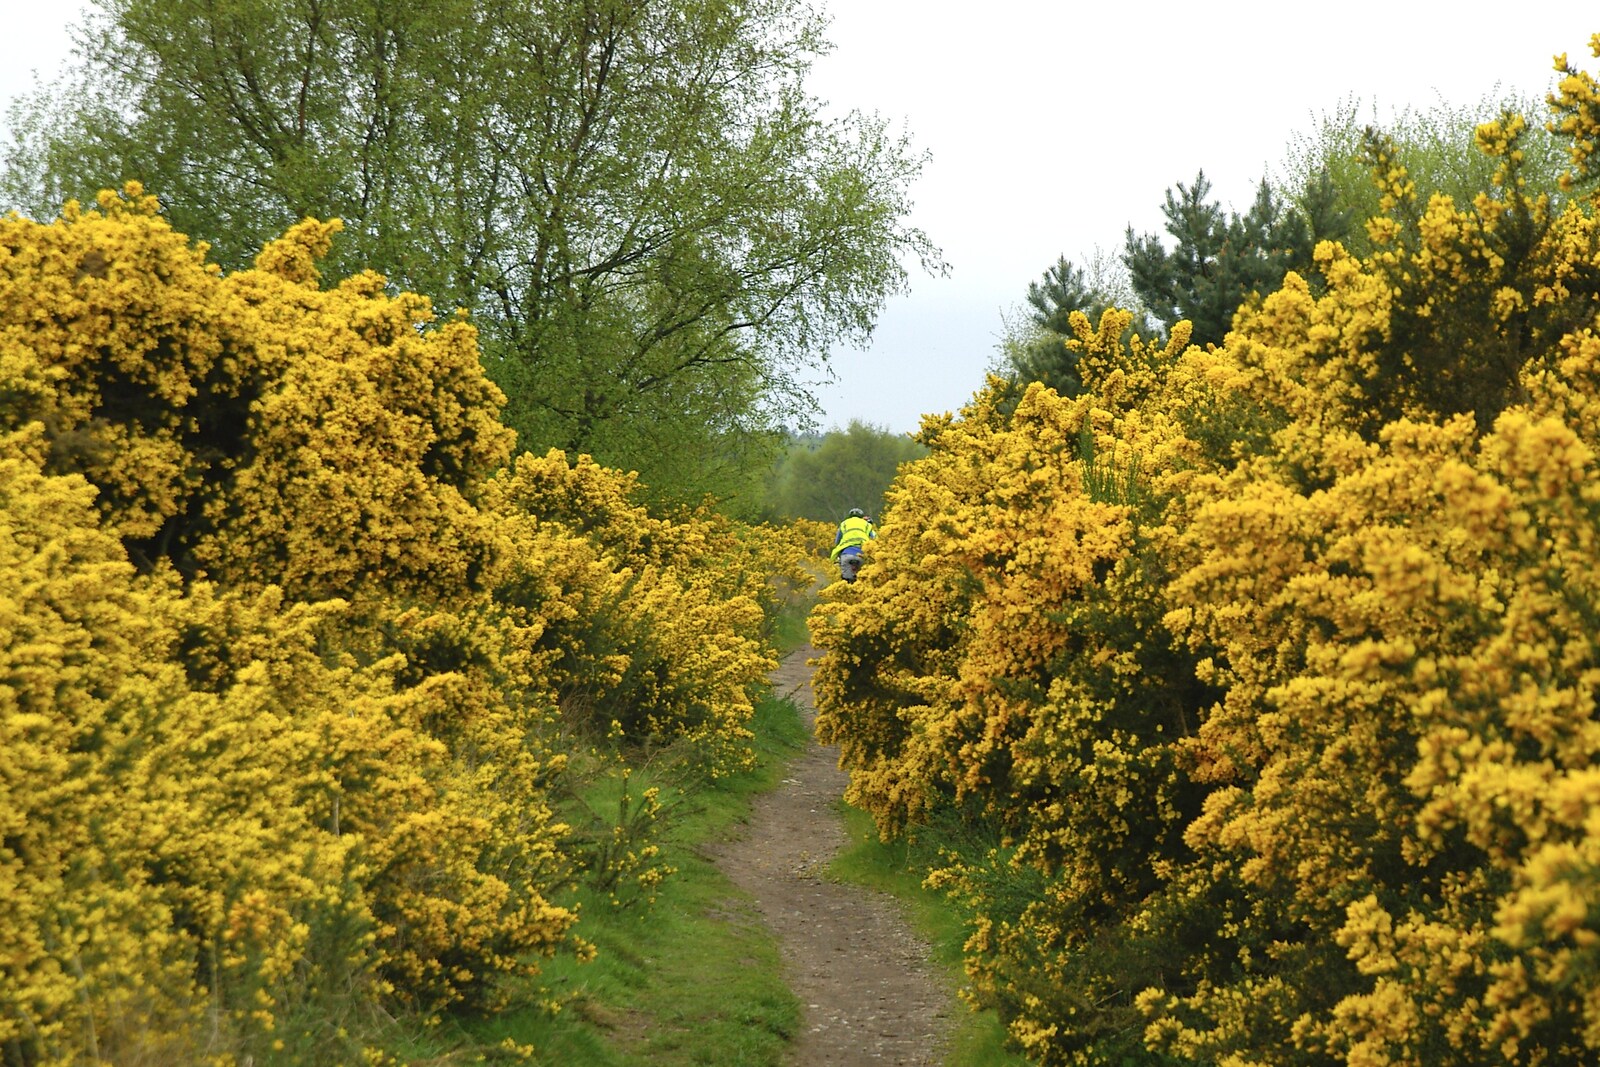 Bright yellow gorse on Kelling Heath from The BSCC does The Pheasant Hotel, Kelling, Norfolk - 6th May 2006